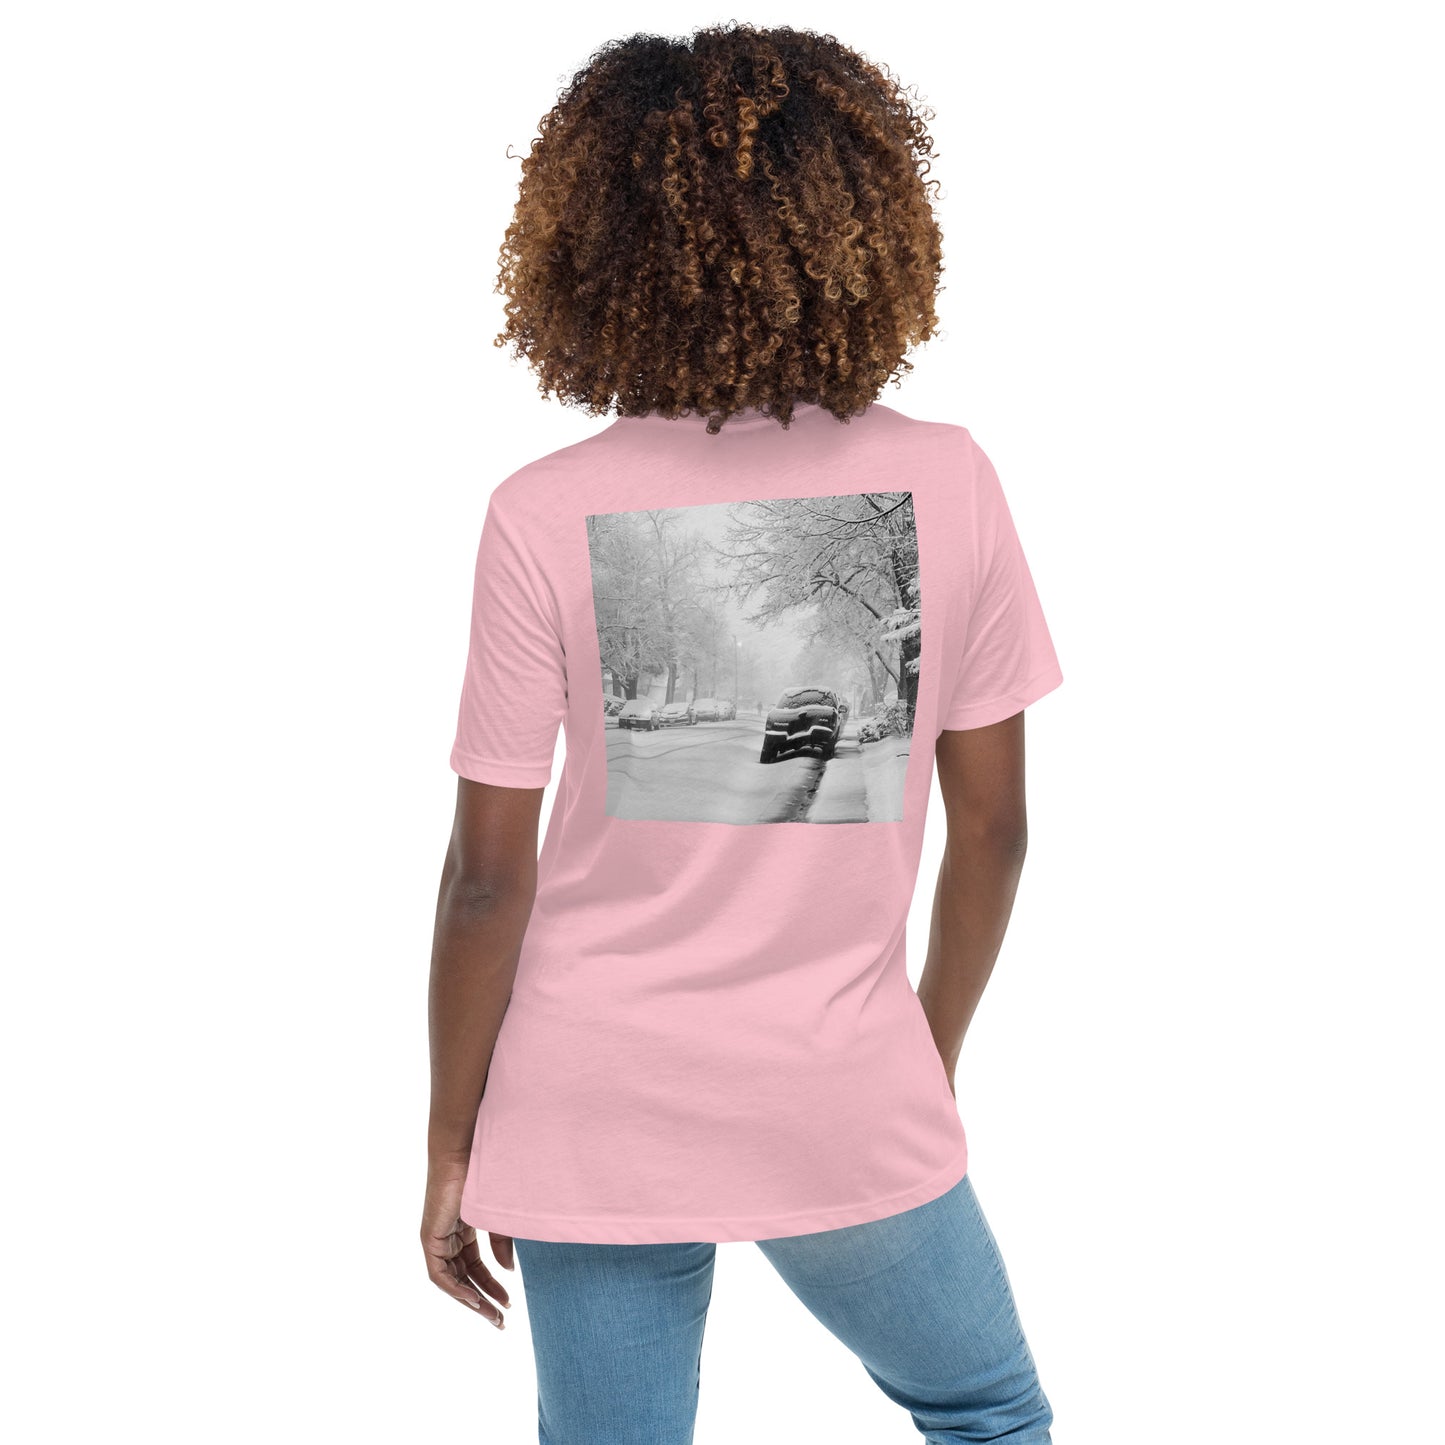 Alone In The Snow Women's T-Shirt